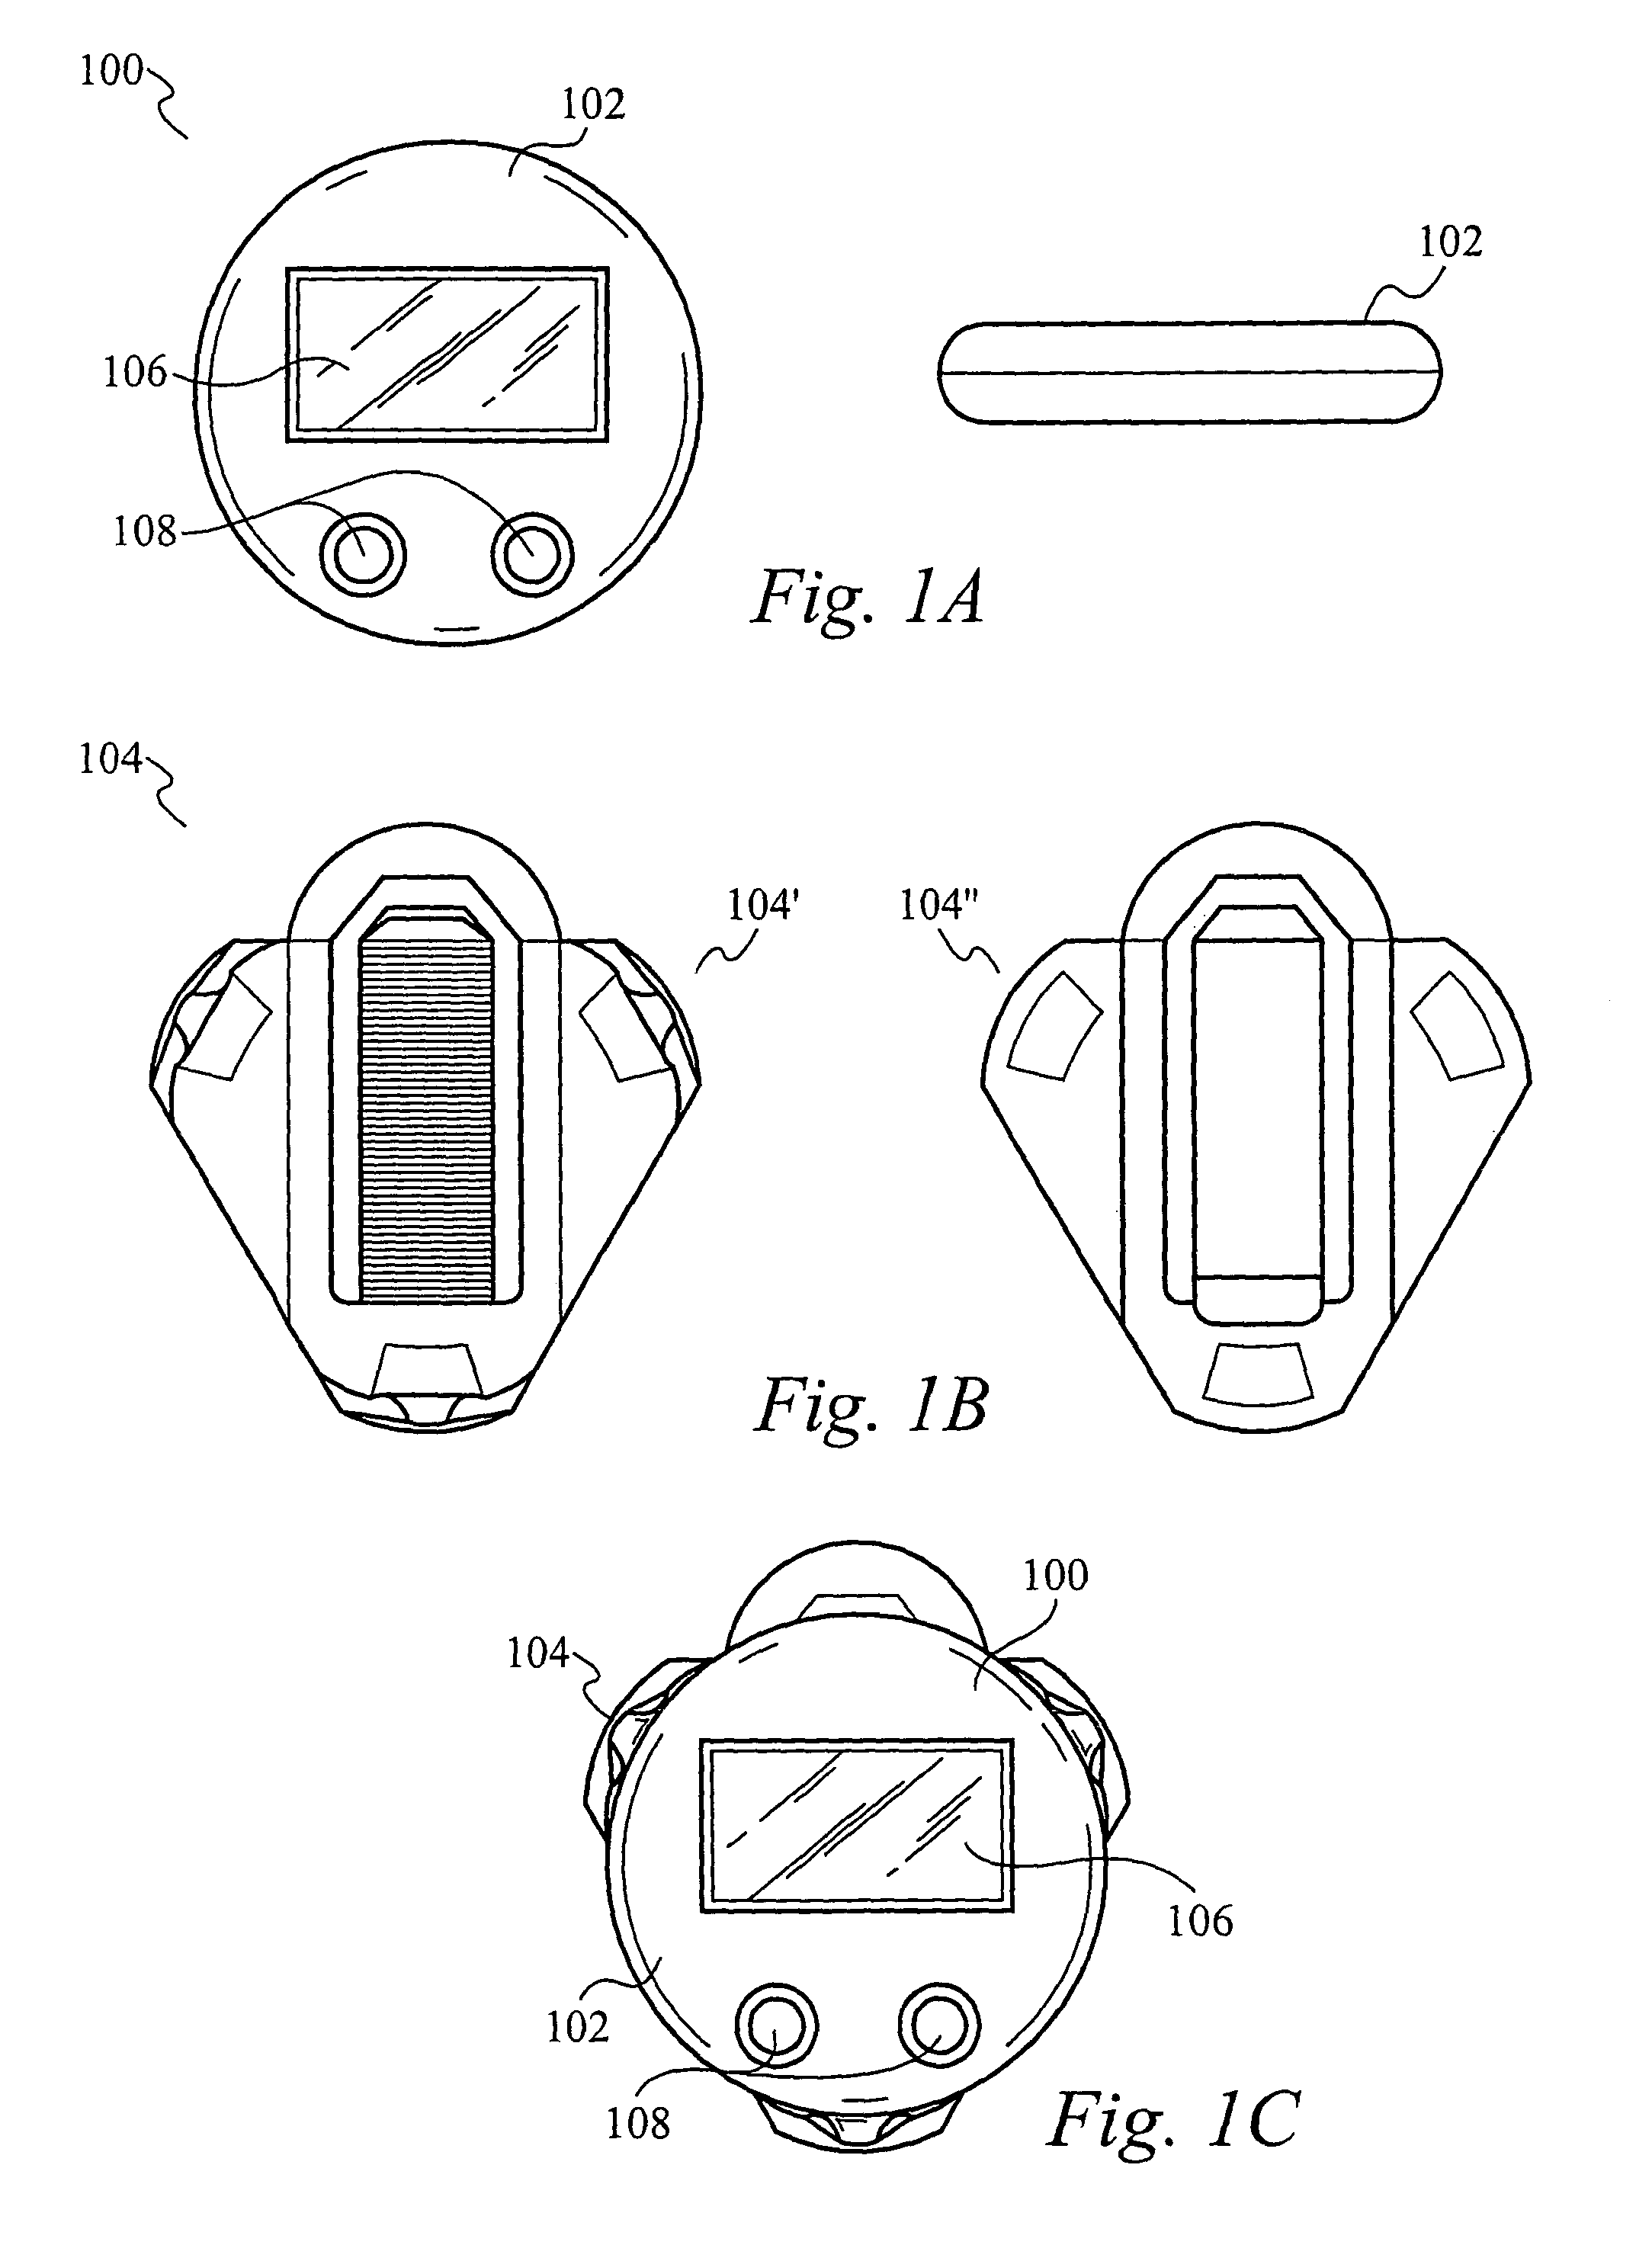 Electronic pace regulating, timing, and coaching device and system